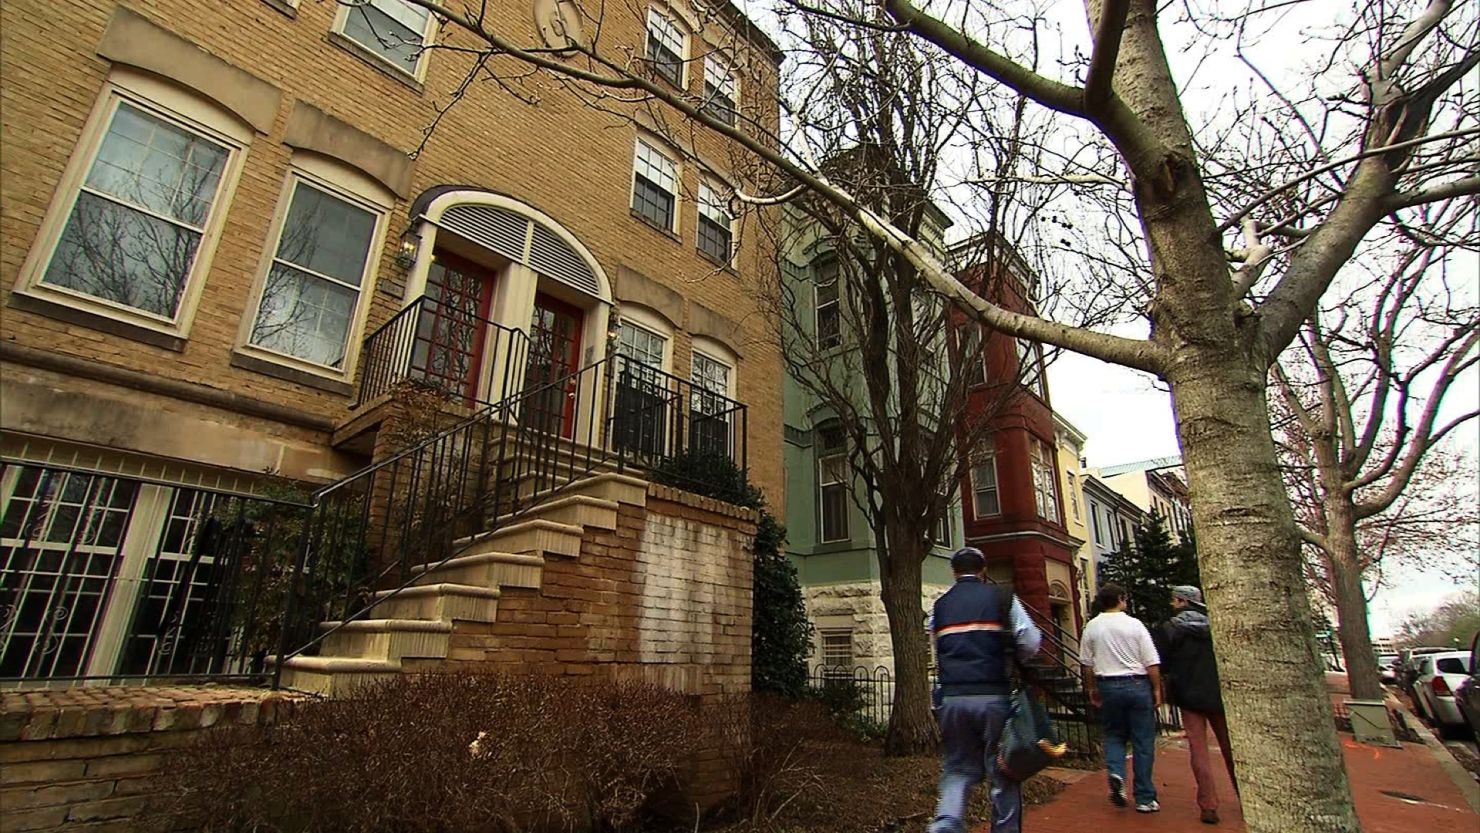 The Capitol Hill rowhouse (left) in which EPA Administrator Scott Pruitt rented a room from a lobbyist couple for $50 per night.